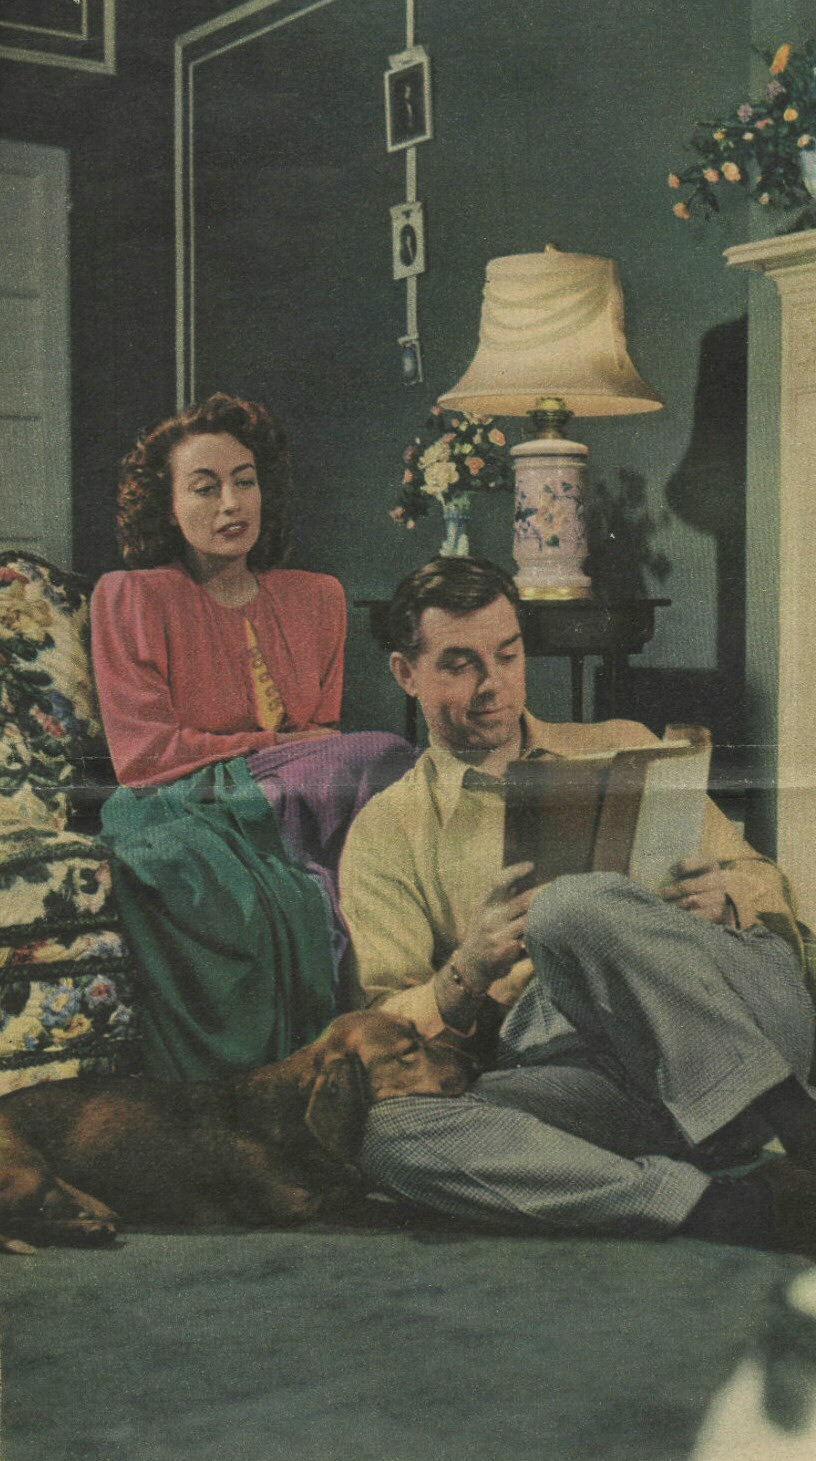 Circa 1945. With husband Phil Terry at their East End apartment in NYC.